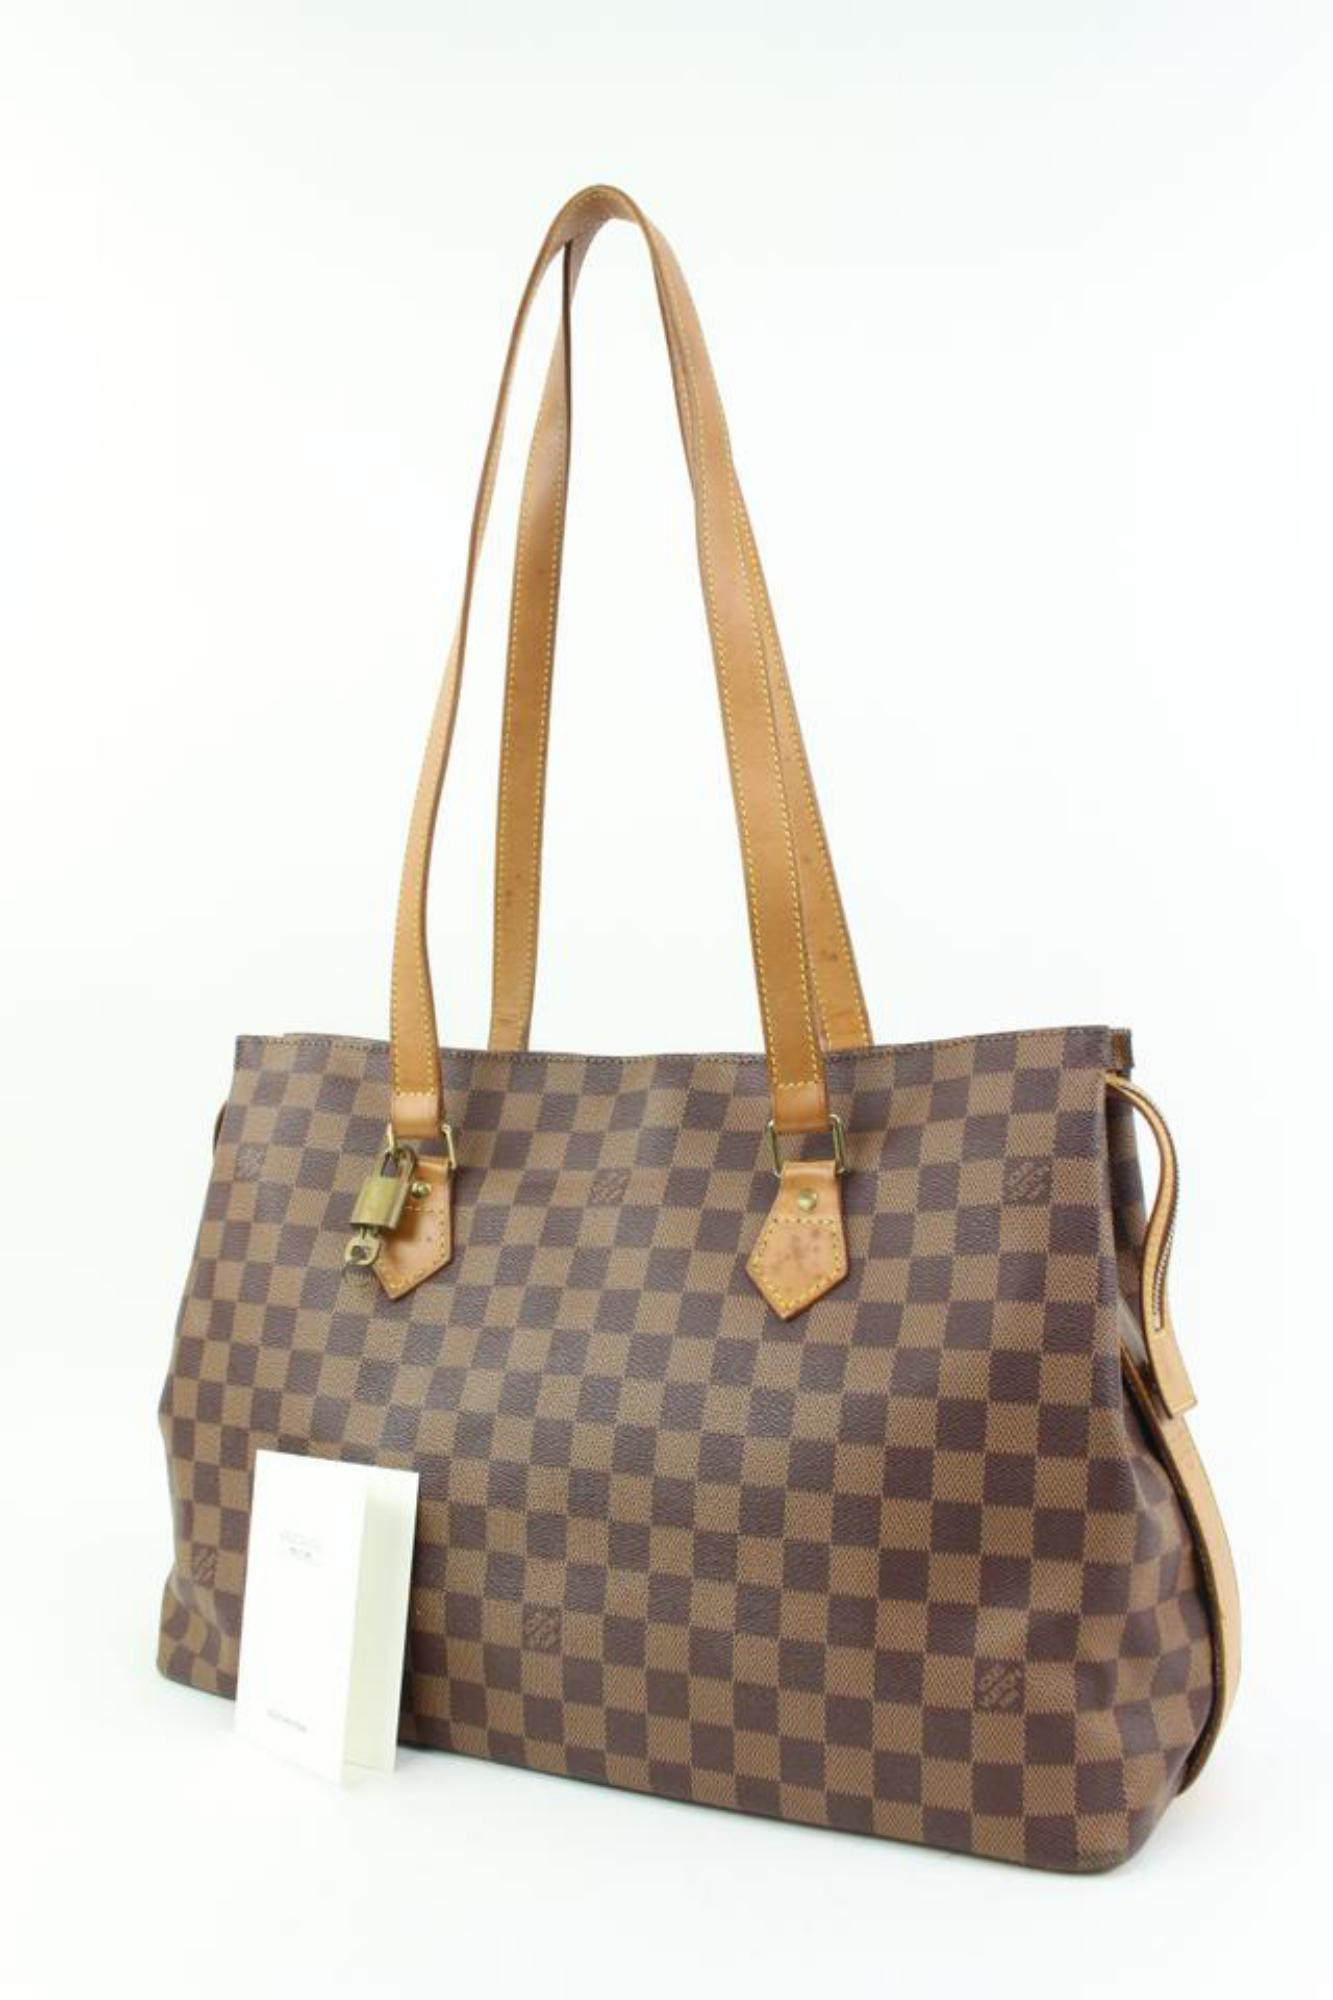 Louis Vuitton Limited Edition Centenaire Damier Columbine Zip Shoulder Bag 64lv315s
Date Code/Serial Number: AS0917
Made In: France
Measurements: Length:  19